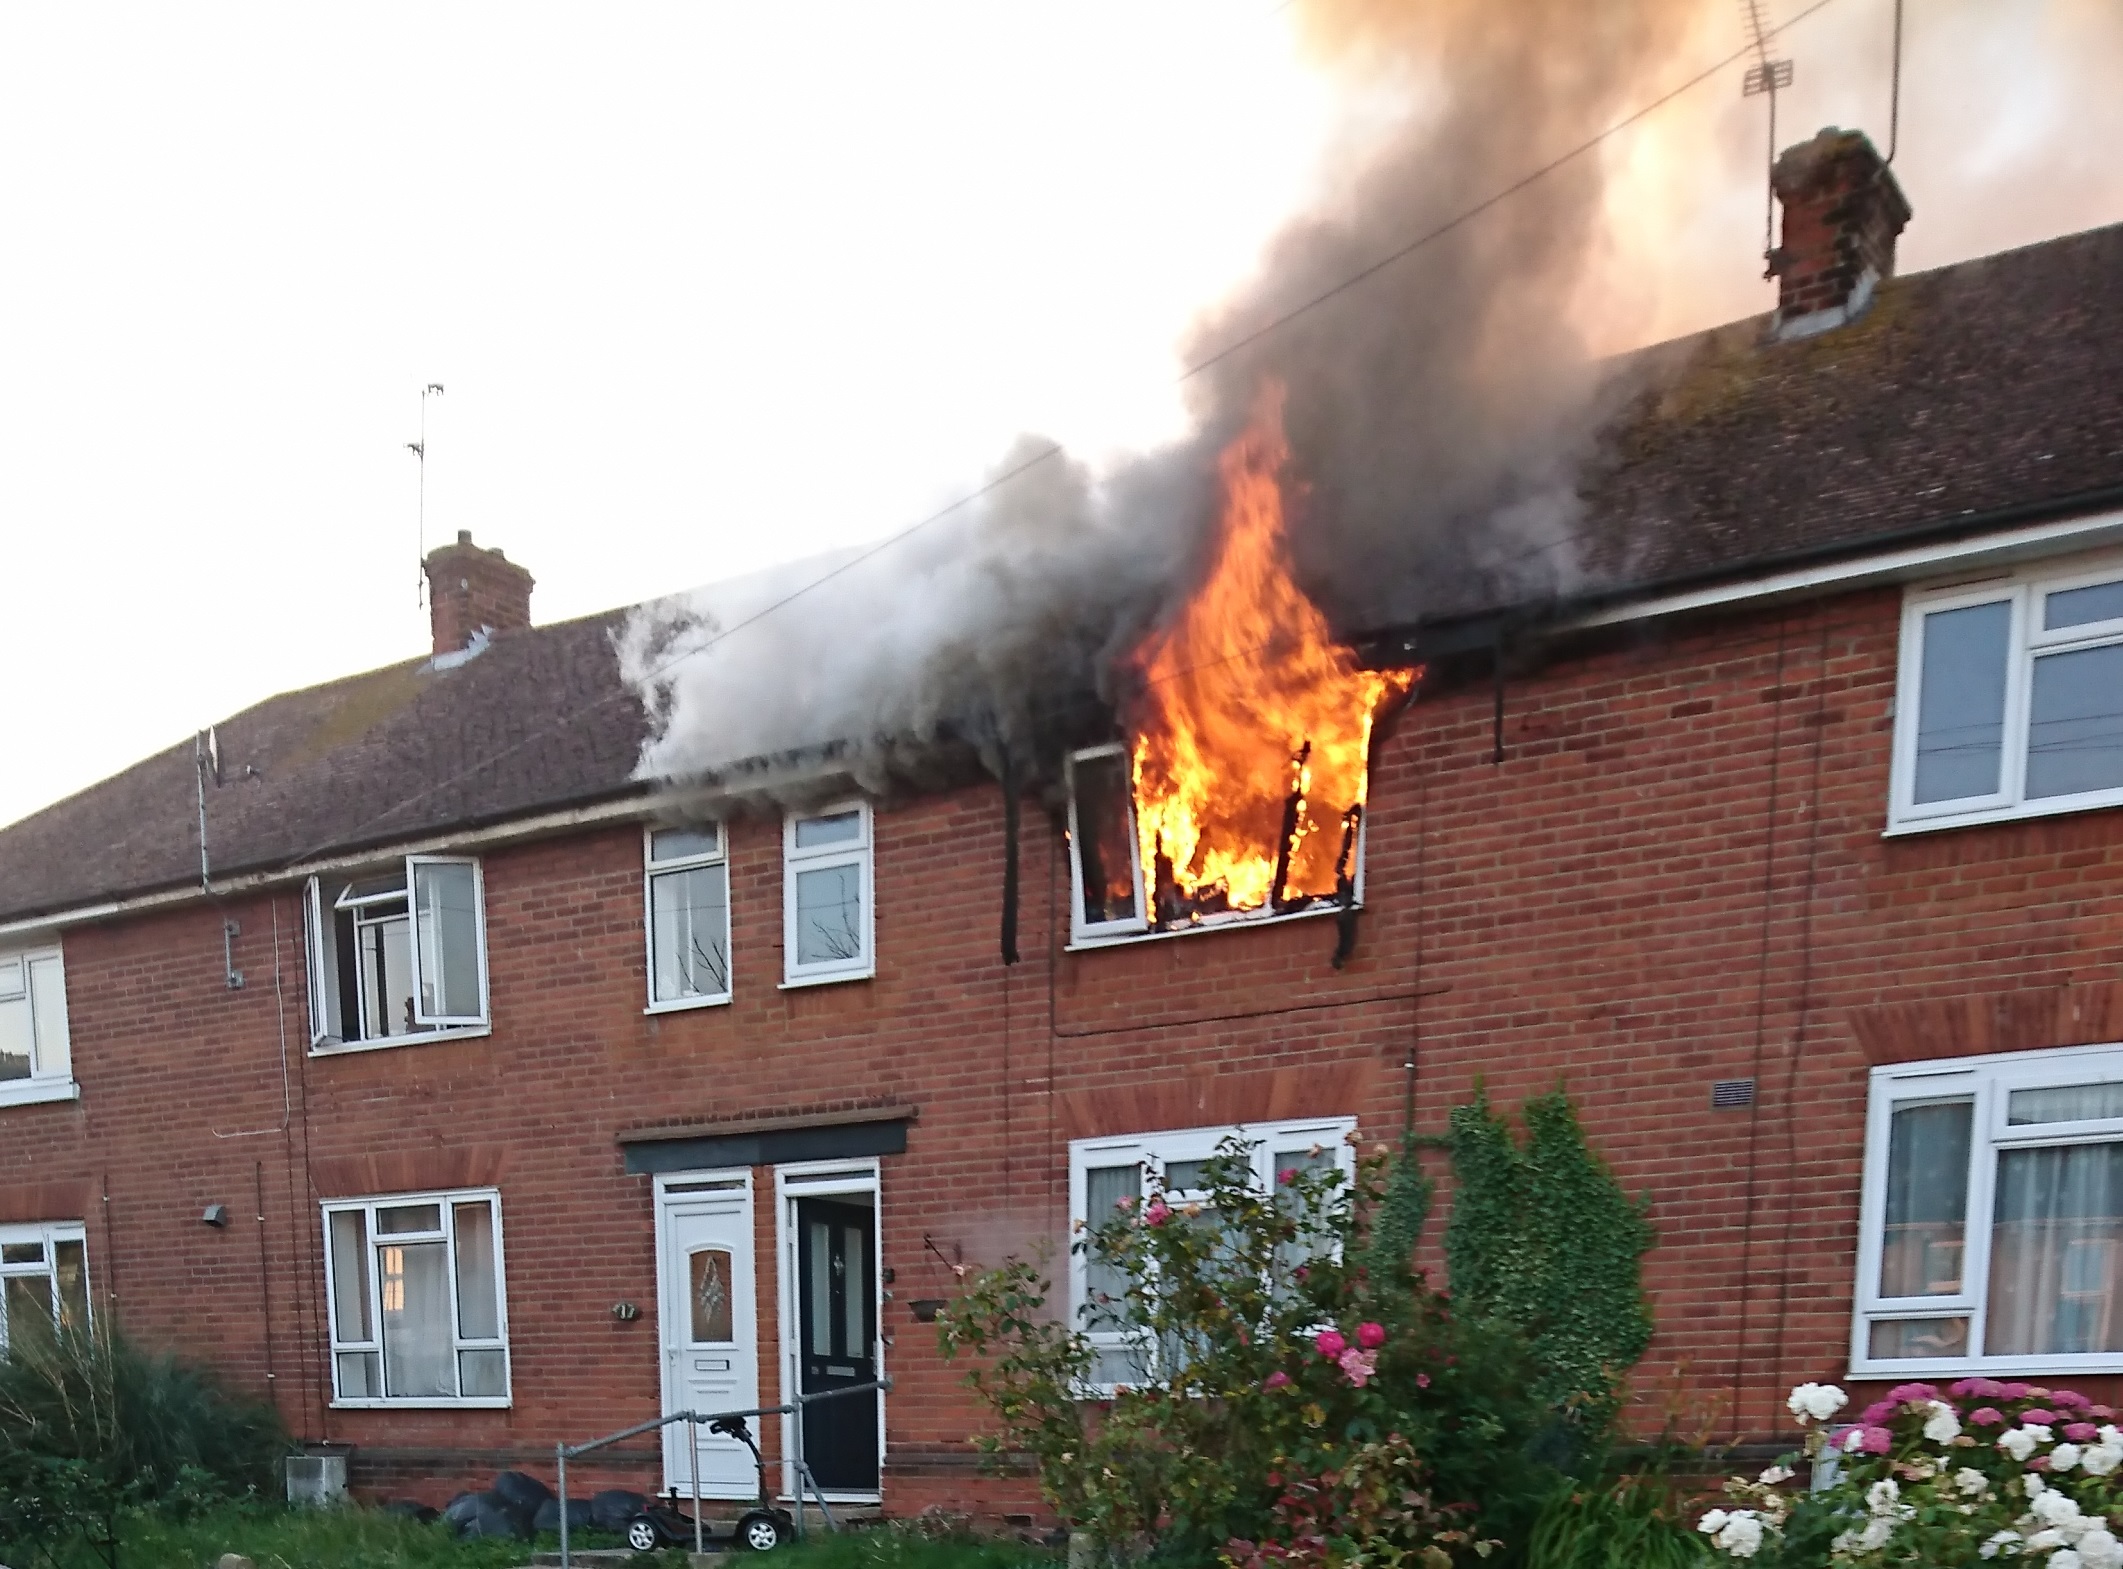 Have-a-go hero tries to break into house to save woman from blaze